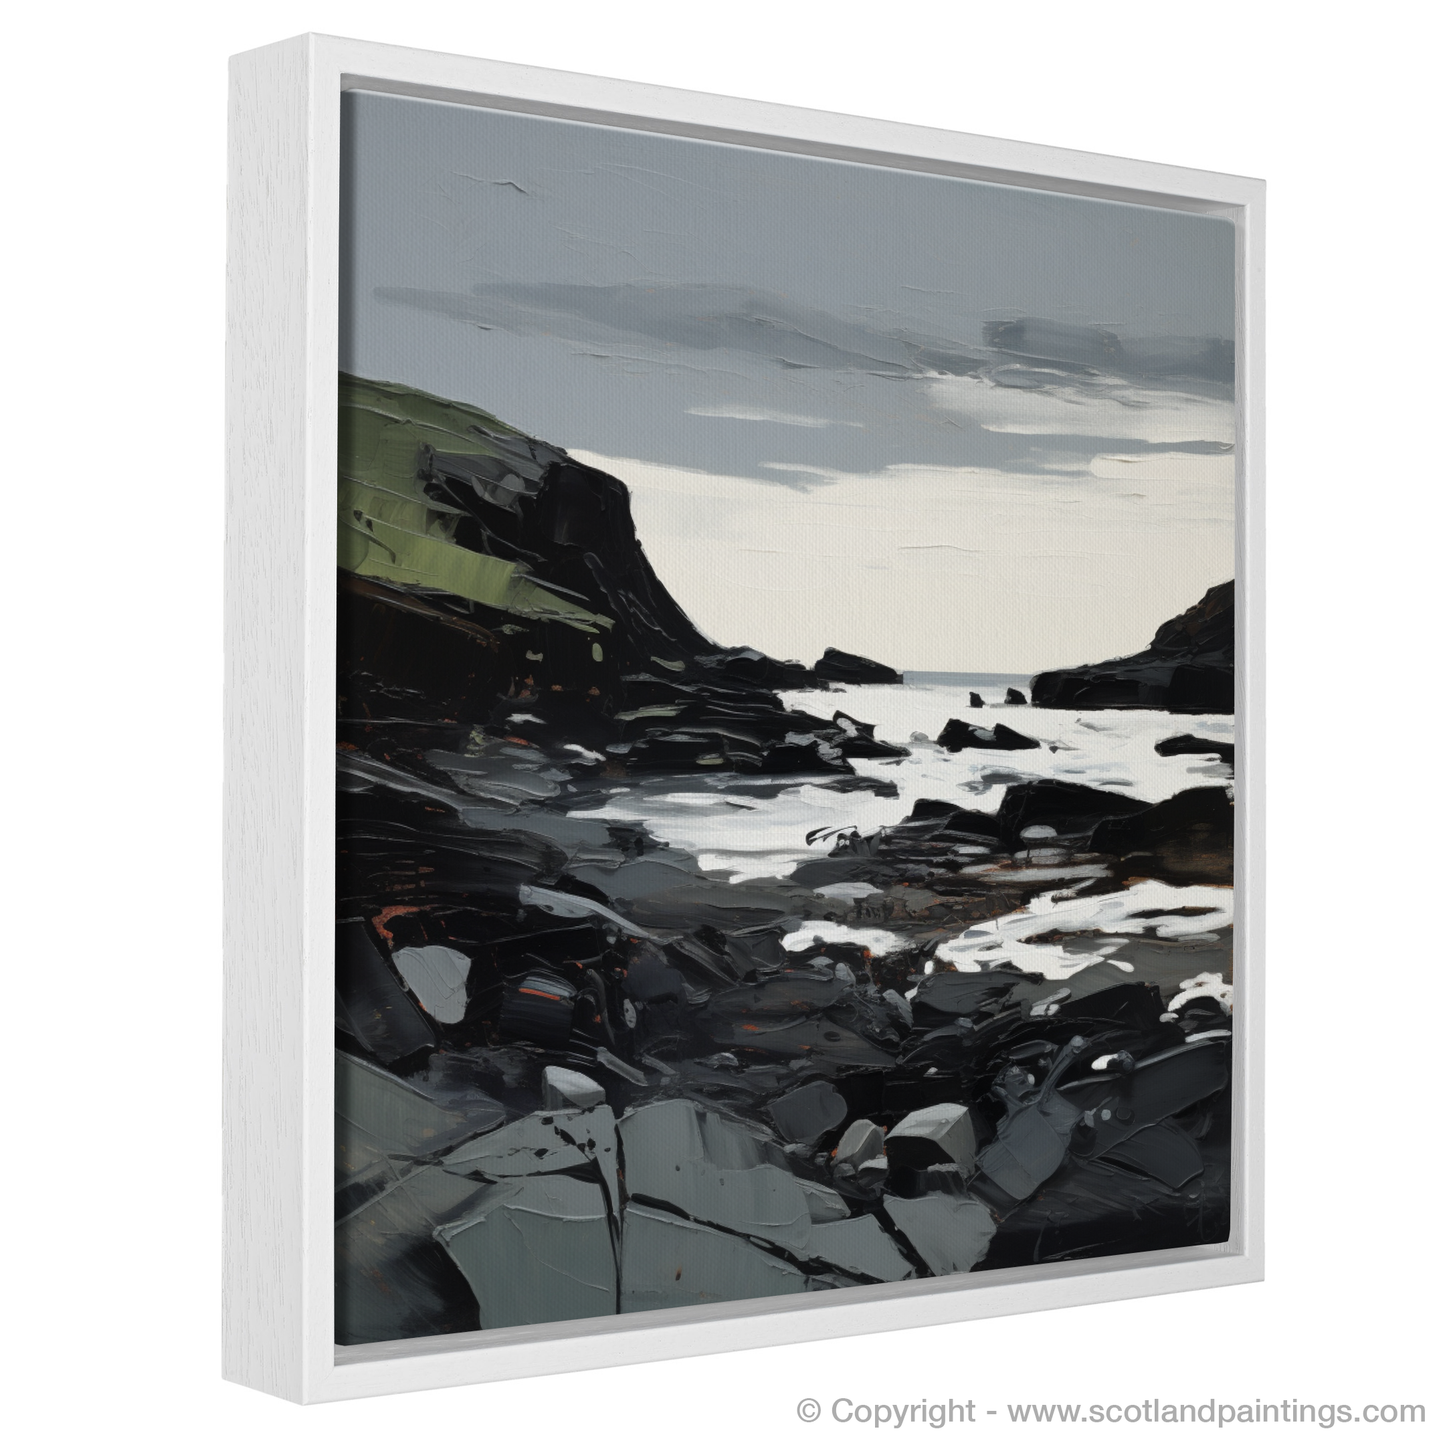 Painting and Art Print of Catterline Bay, Aberdeenshire entitled "Catterline Bay Unleashed: An Expressionist Ode to Scottish Coves".